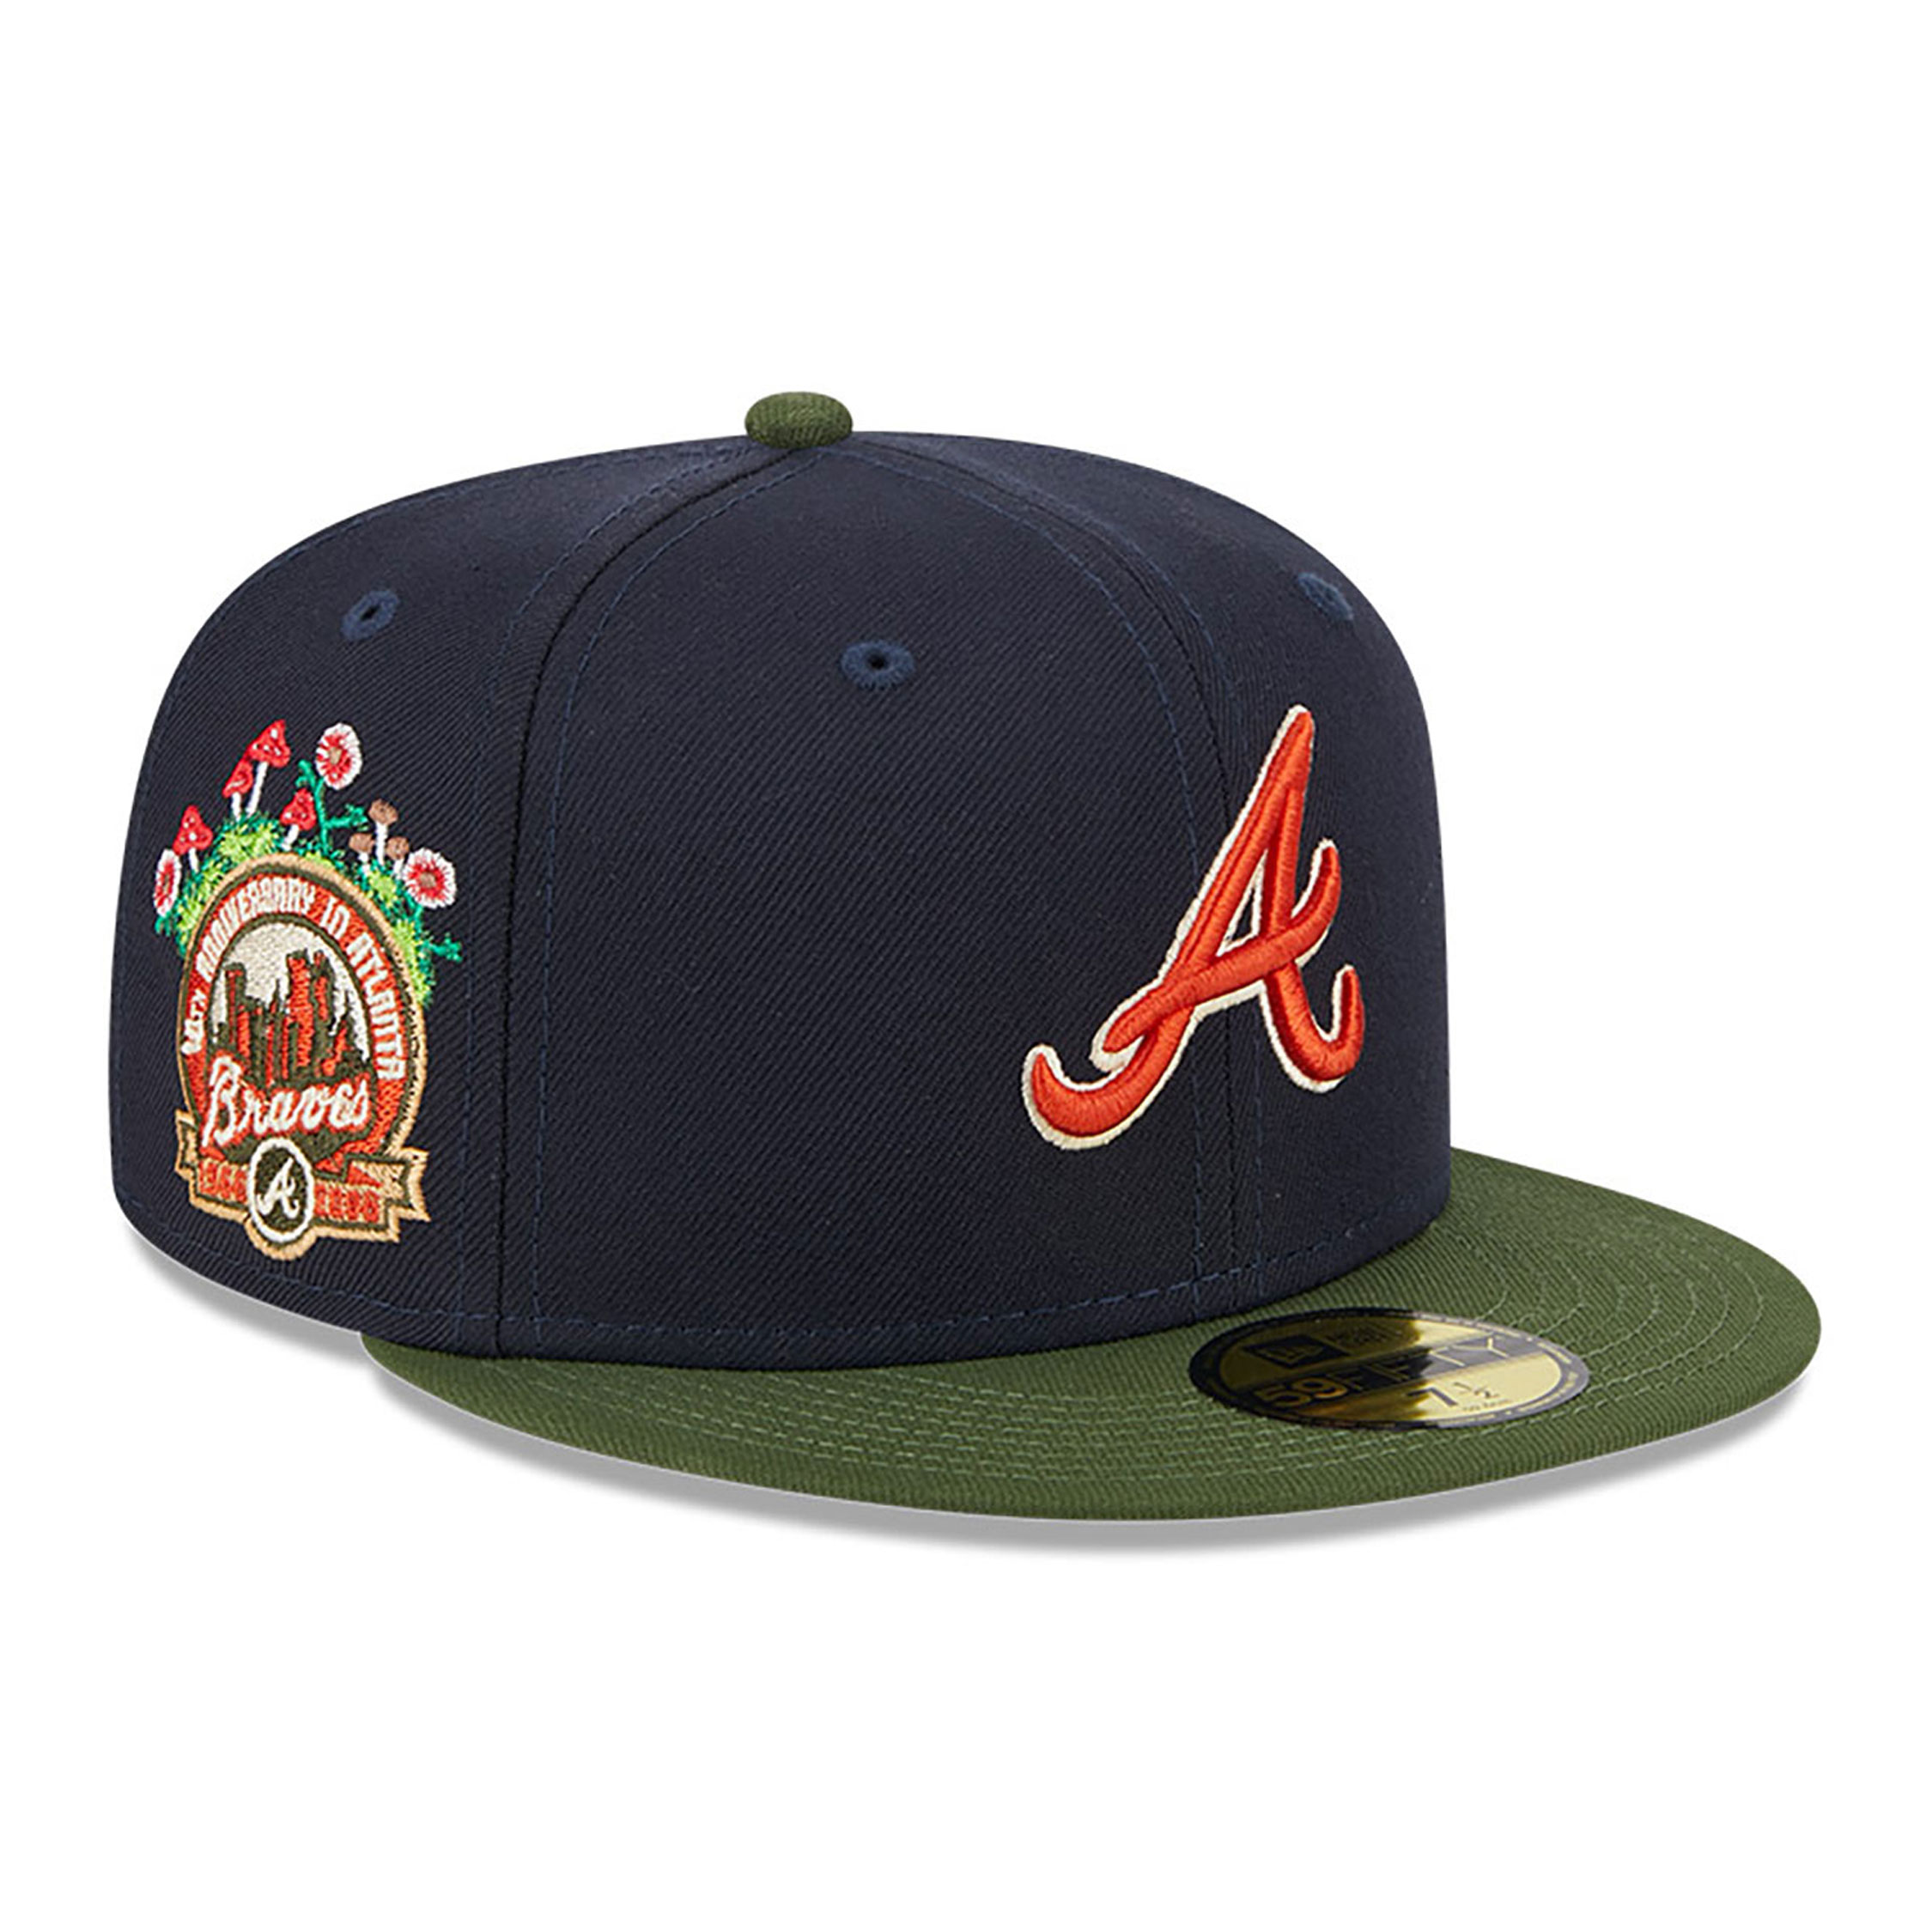 Sprouted Atlanta Braves 59FIFTY Fitted Cap D02_42 | New Era Cap UK